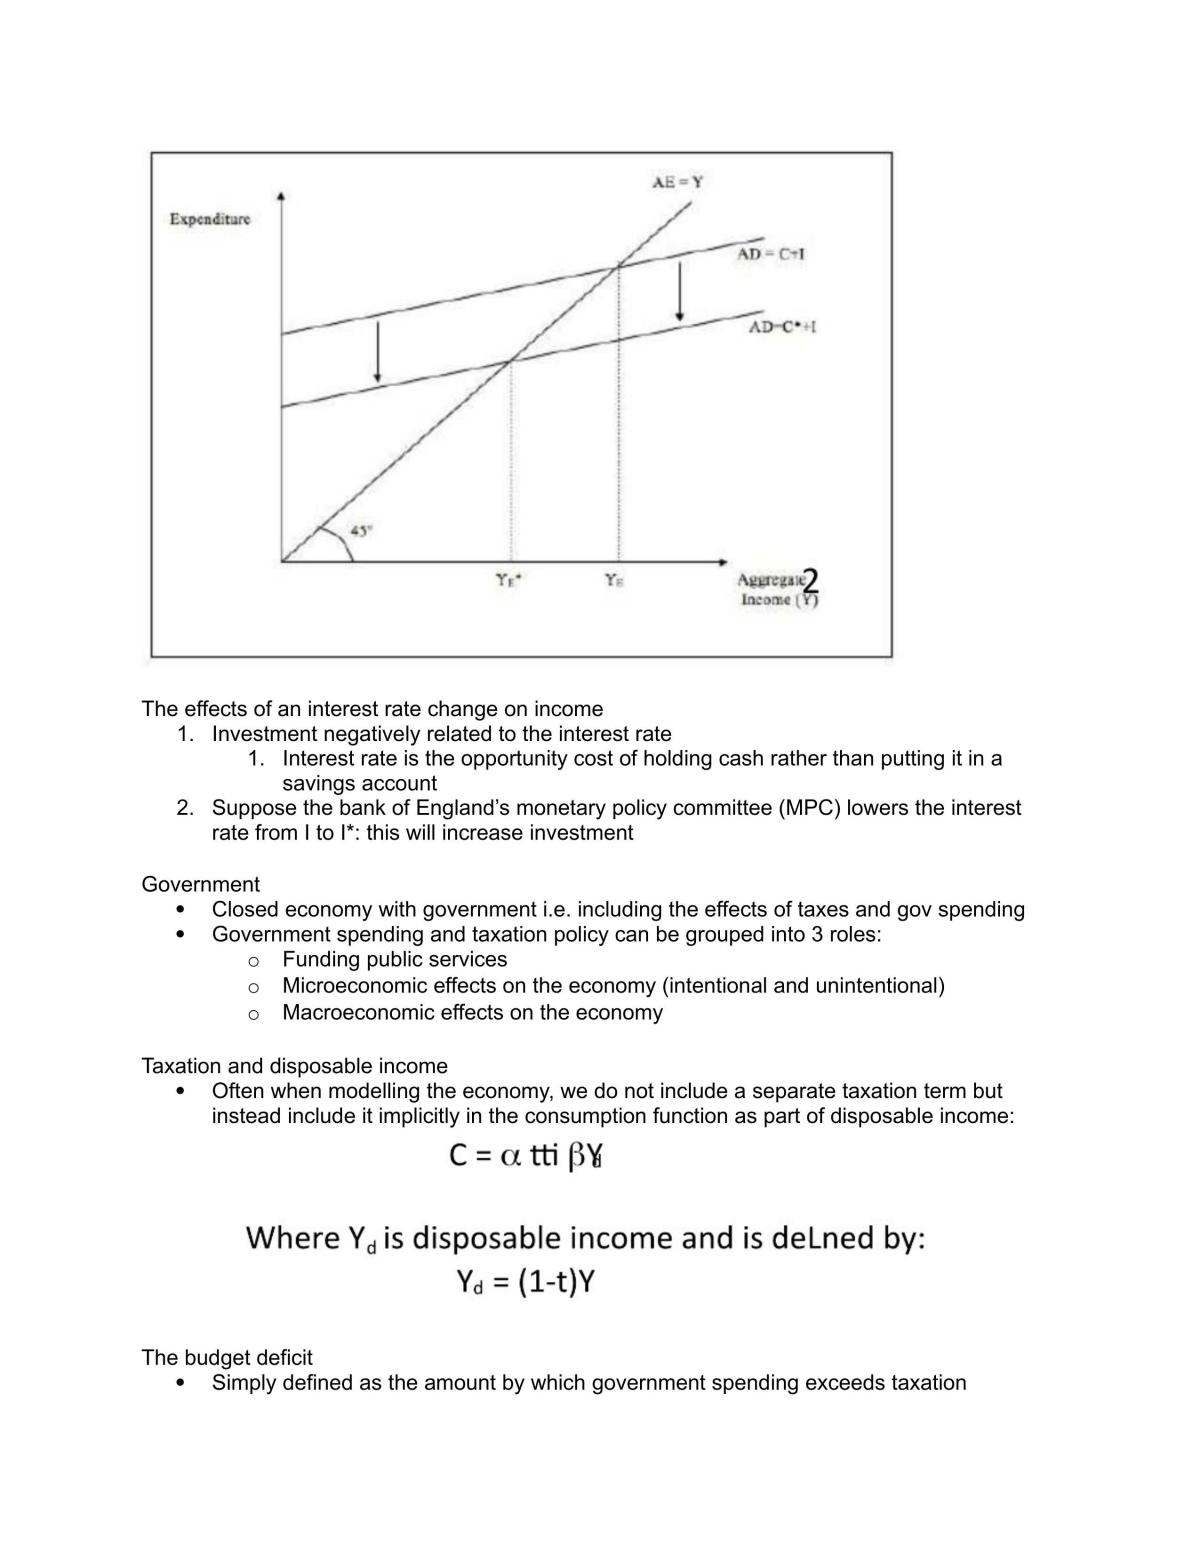 Foundations of Economic Analysis Revision Guide - Page 74